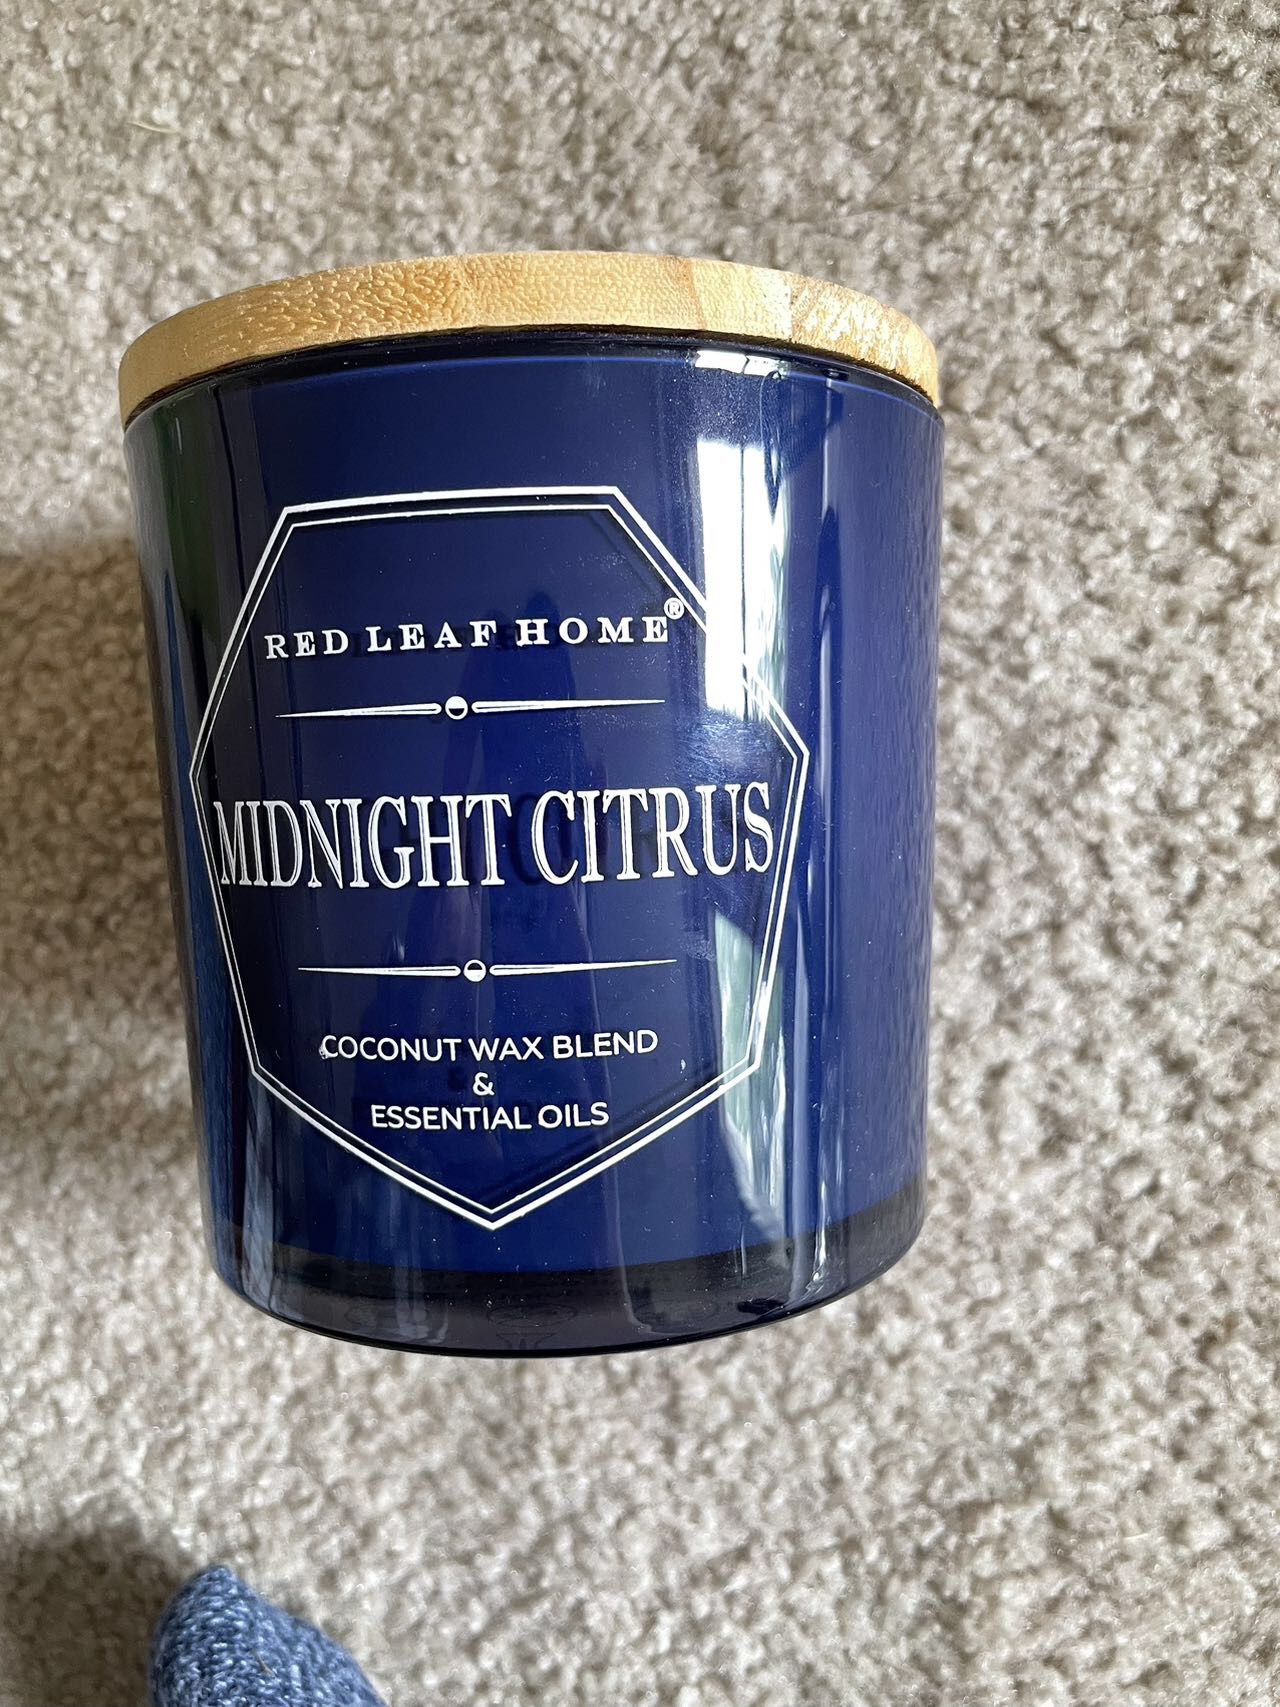 Red leaf home midnight citrus coconut wax blend & essential oils  Scented Candles